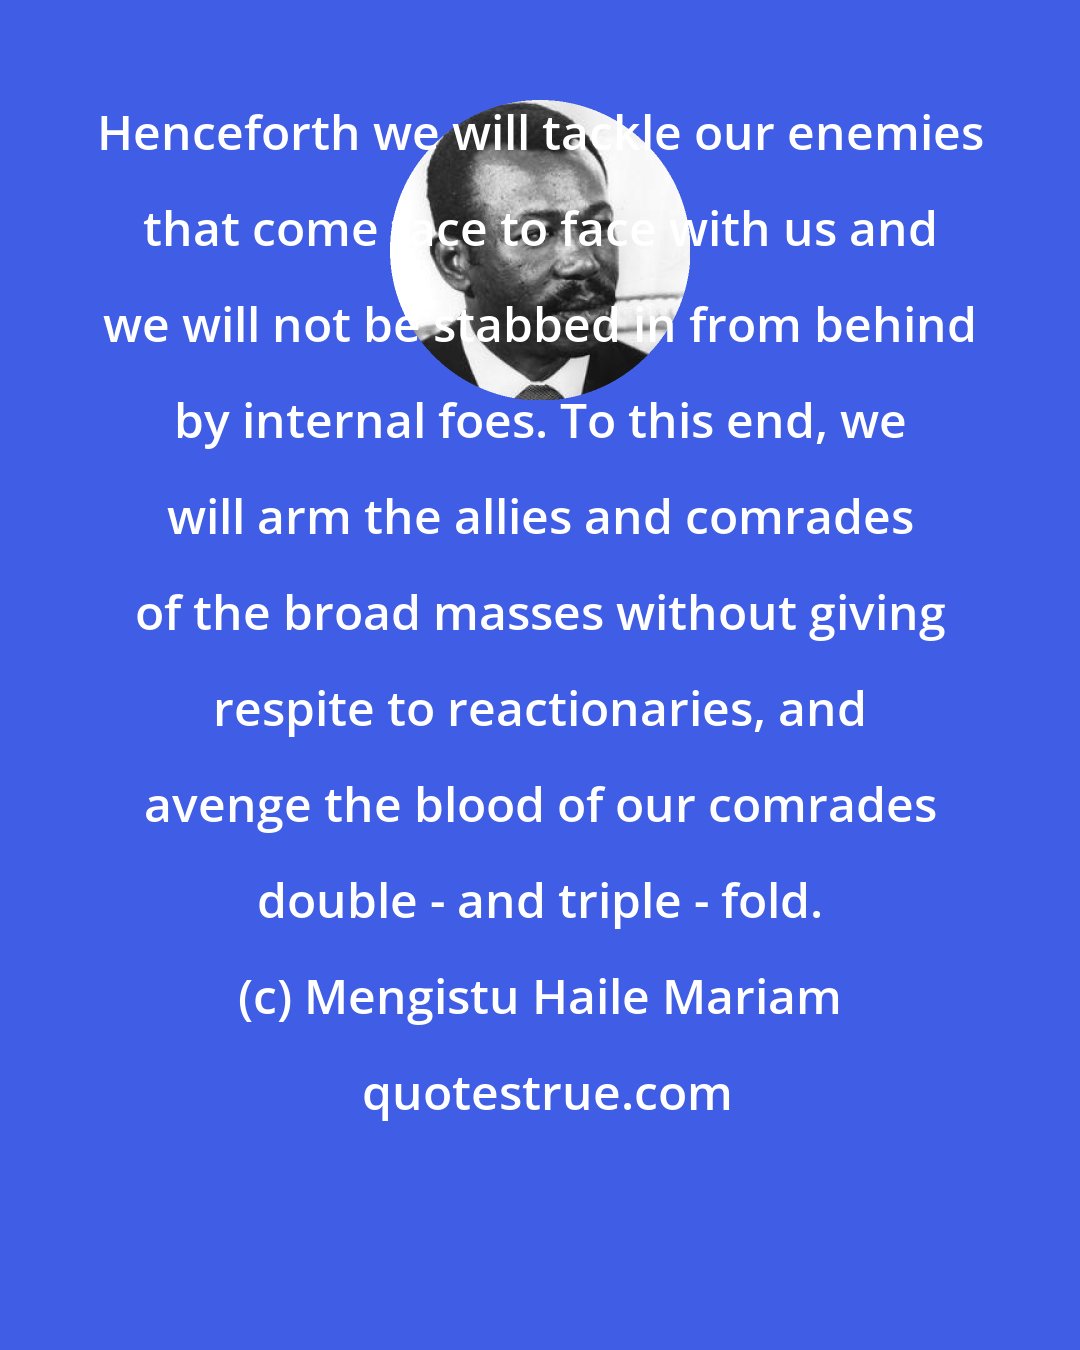 Mengistu Haile Mariam: Henceforth we will tackle our enemies that come face to face with us and we will not be stabbed in from behind by internal foes. To this end, we will arm the allies and comrades of the broad masses without giving respite to reactionaries, and avenge the blood of our comrades double - and triple - fold.